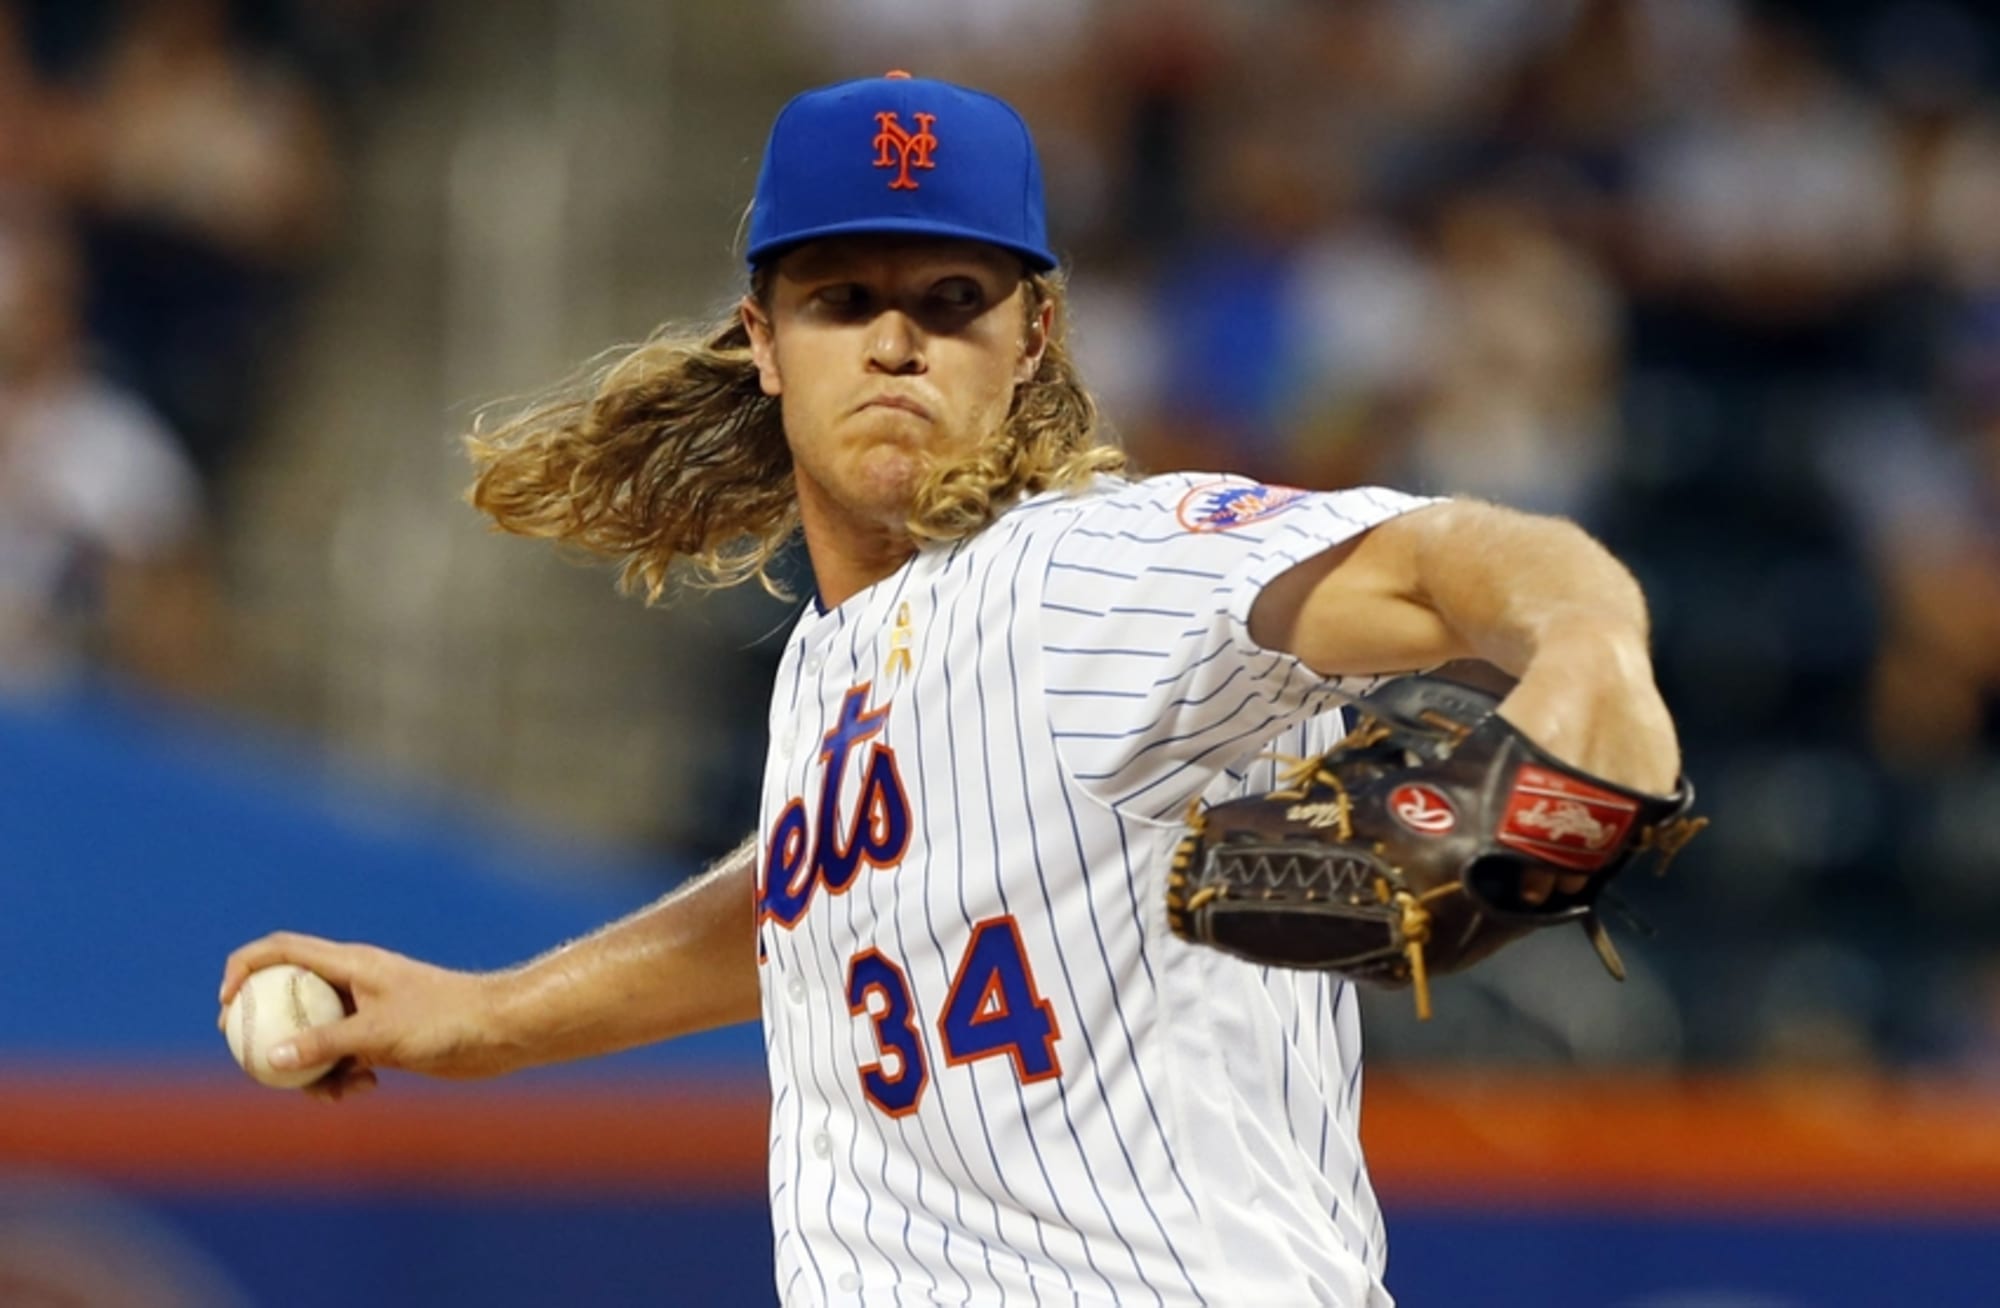 Madison Bumgarner and Noah Syndergaard will face off in the NL